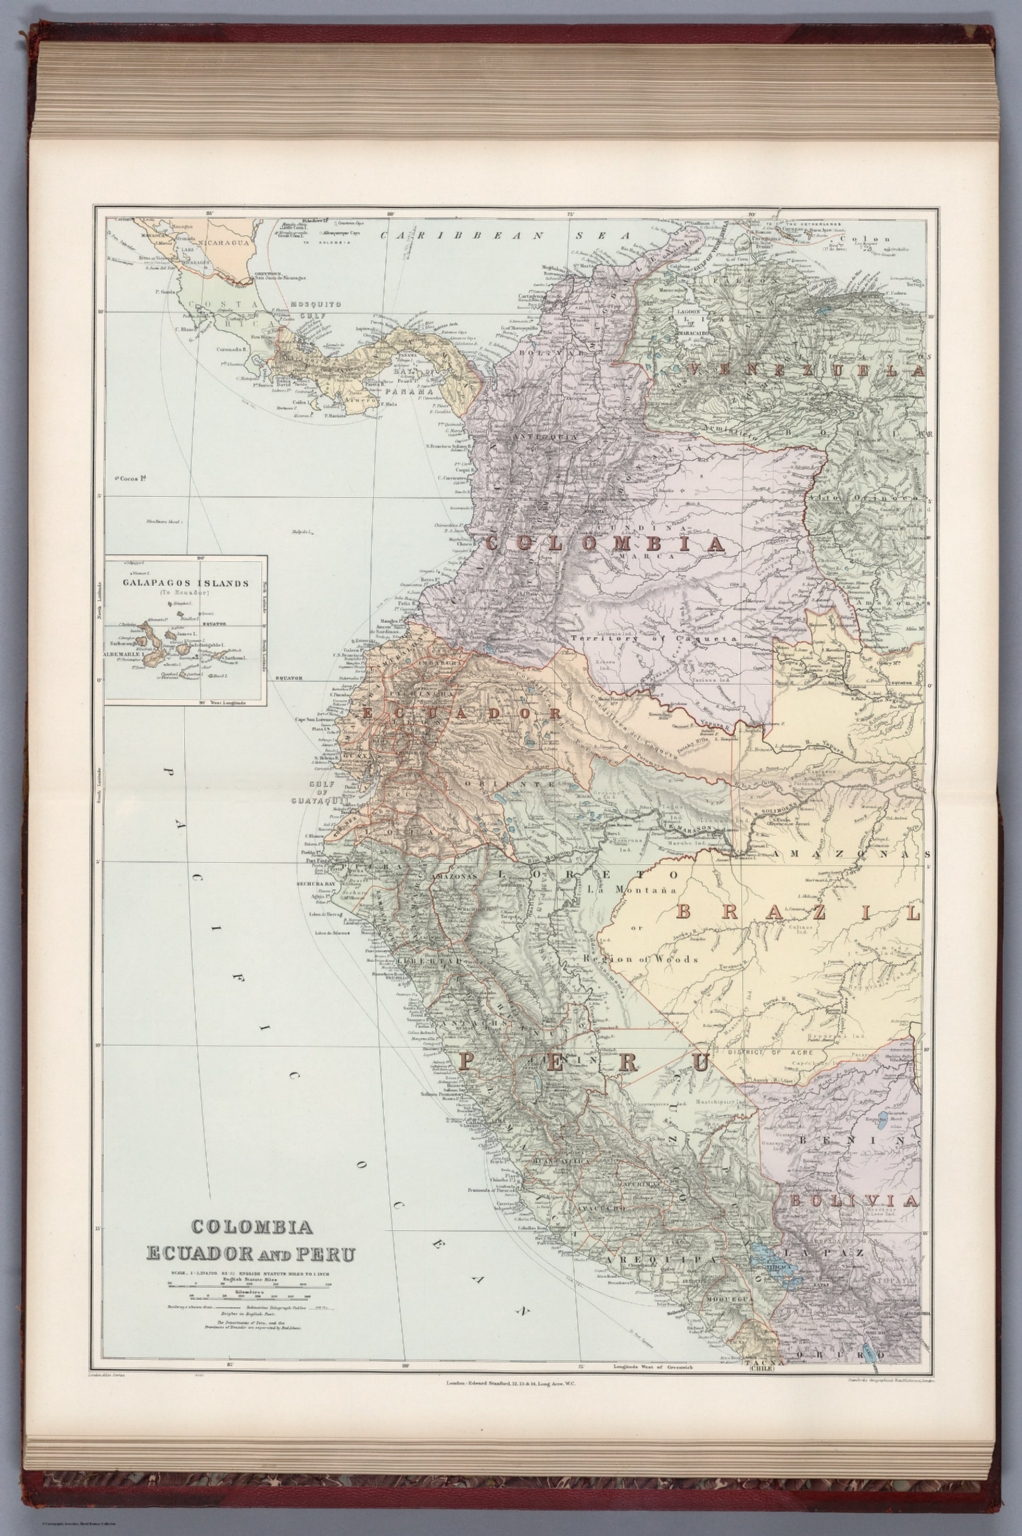 Colombia, Ecuador and Peru. - David Rumsey Historical Map Collection